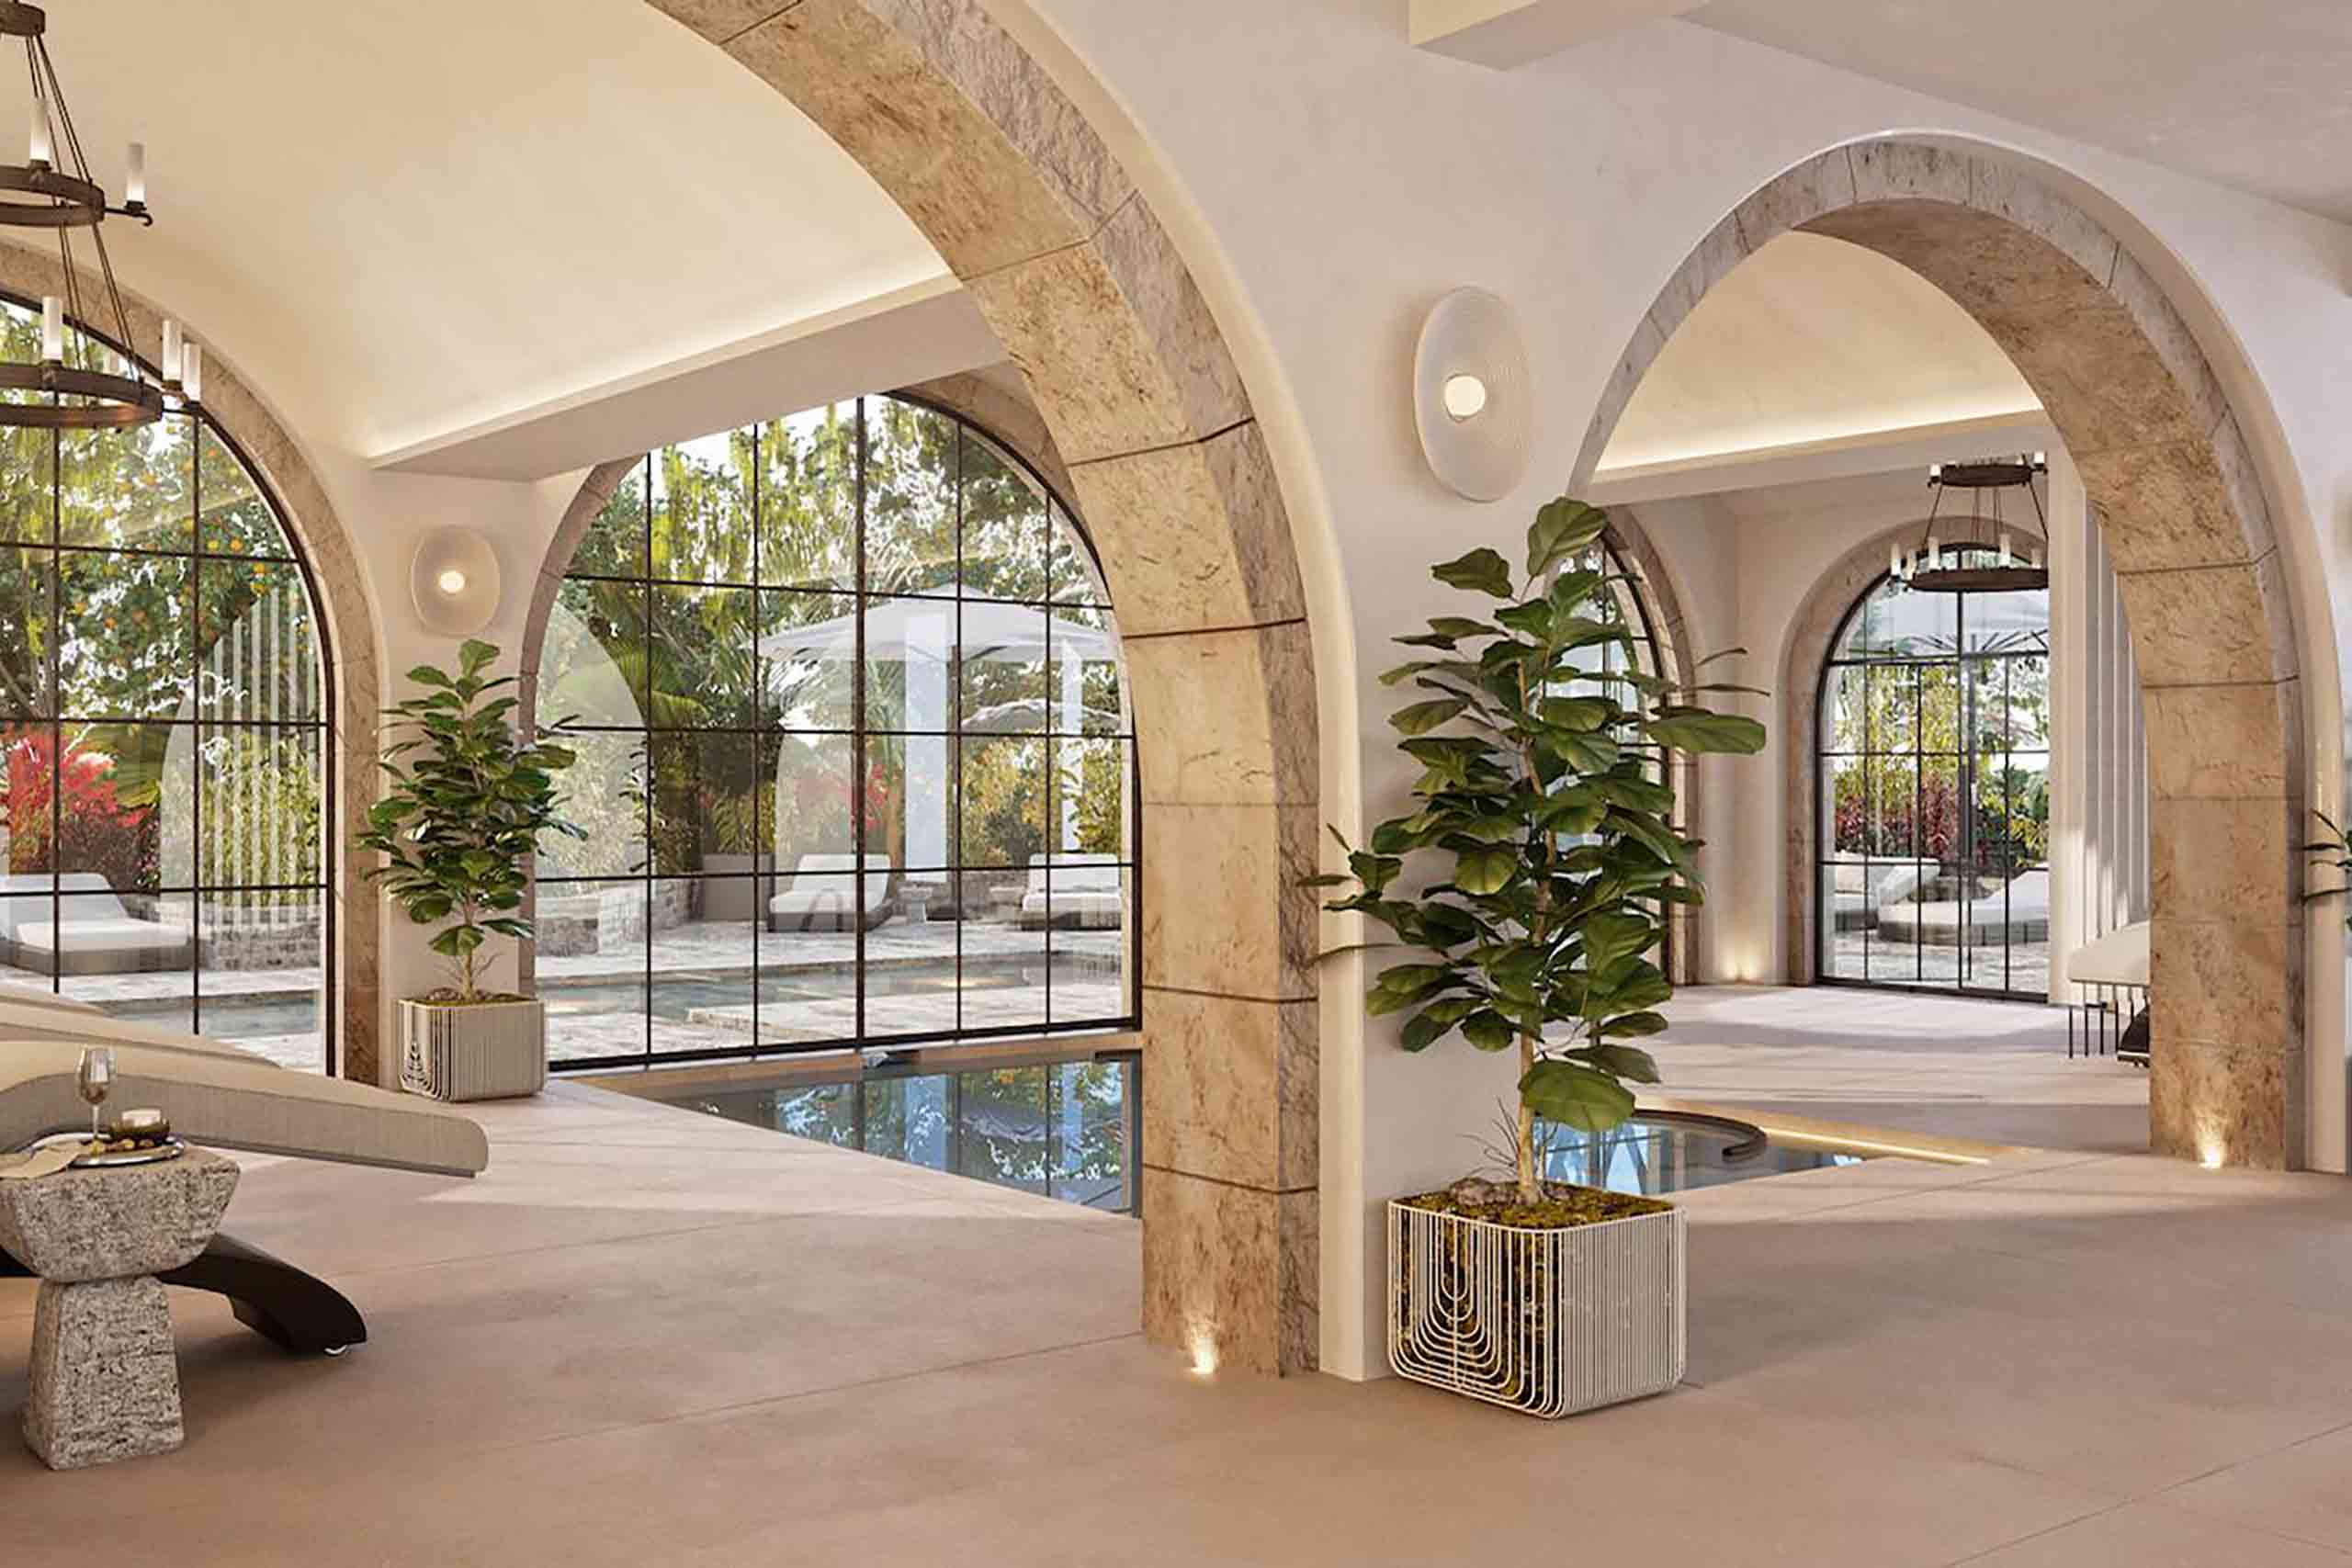 An indoor spa space with arched walls and a pool.